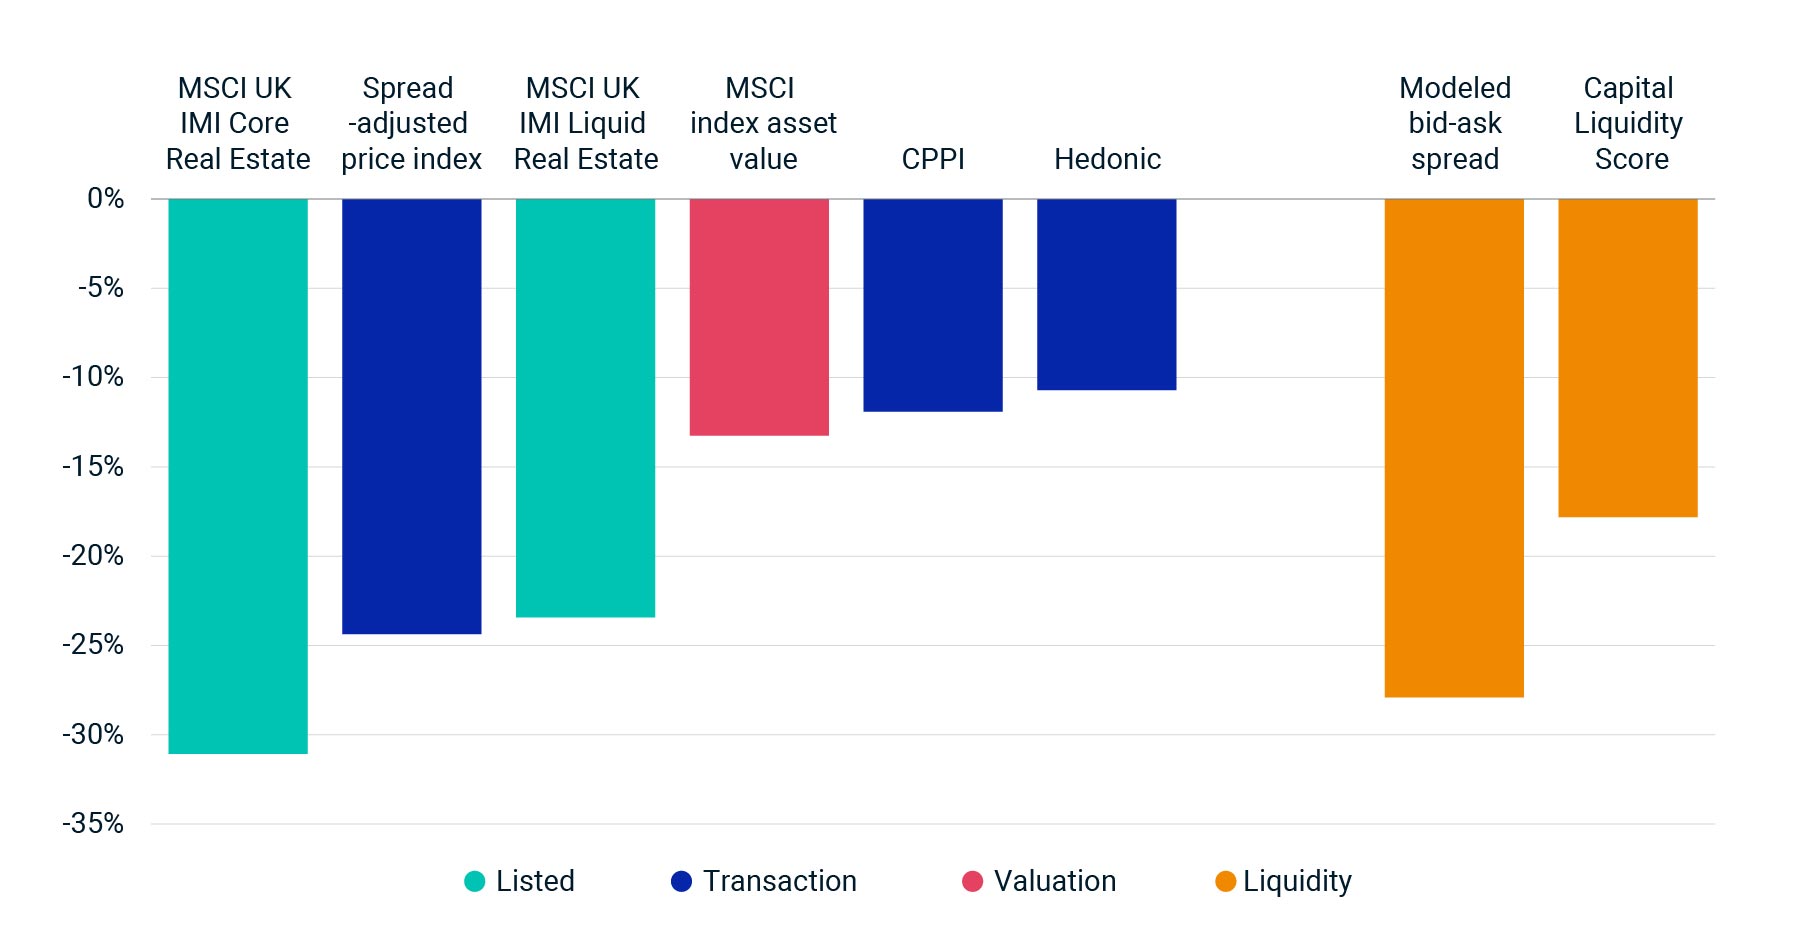 This column chart shows eight different measures for pricing and liquidity in the U.K. office market. The measures show varying magnitudes of decline.  